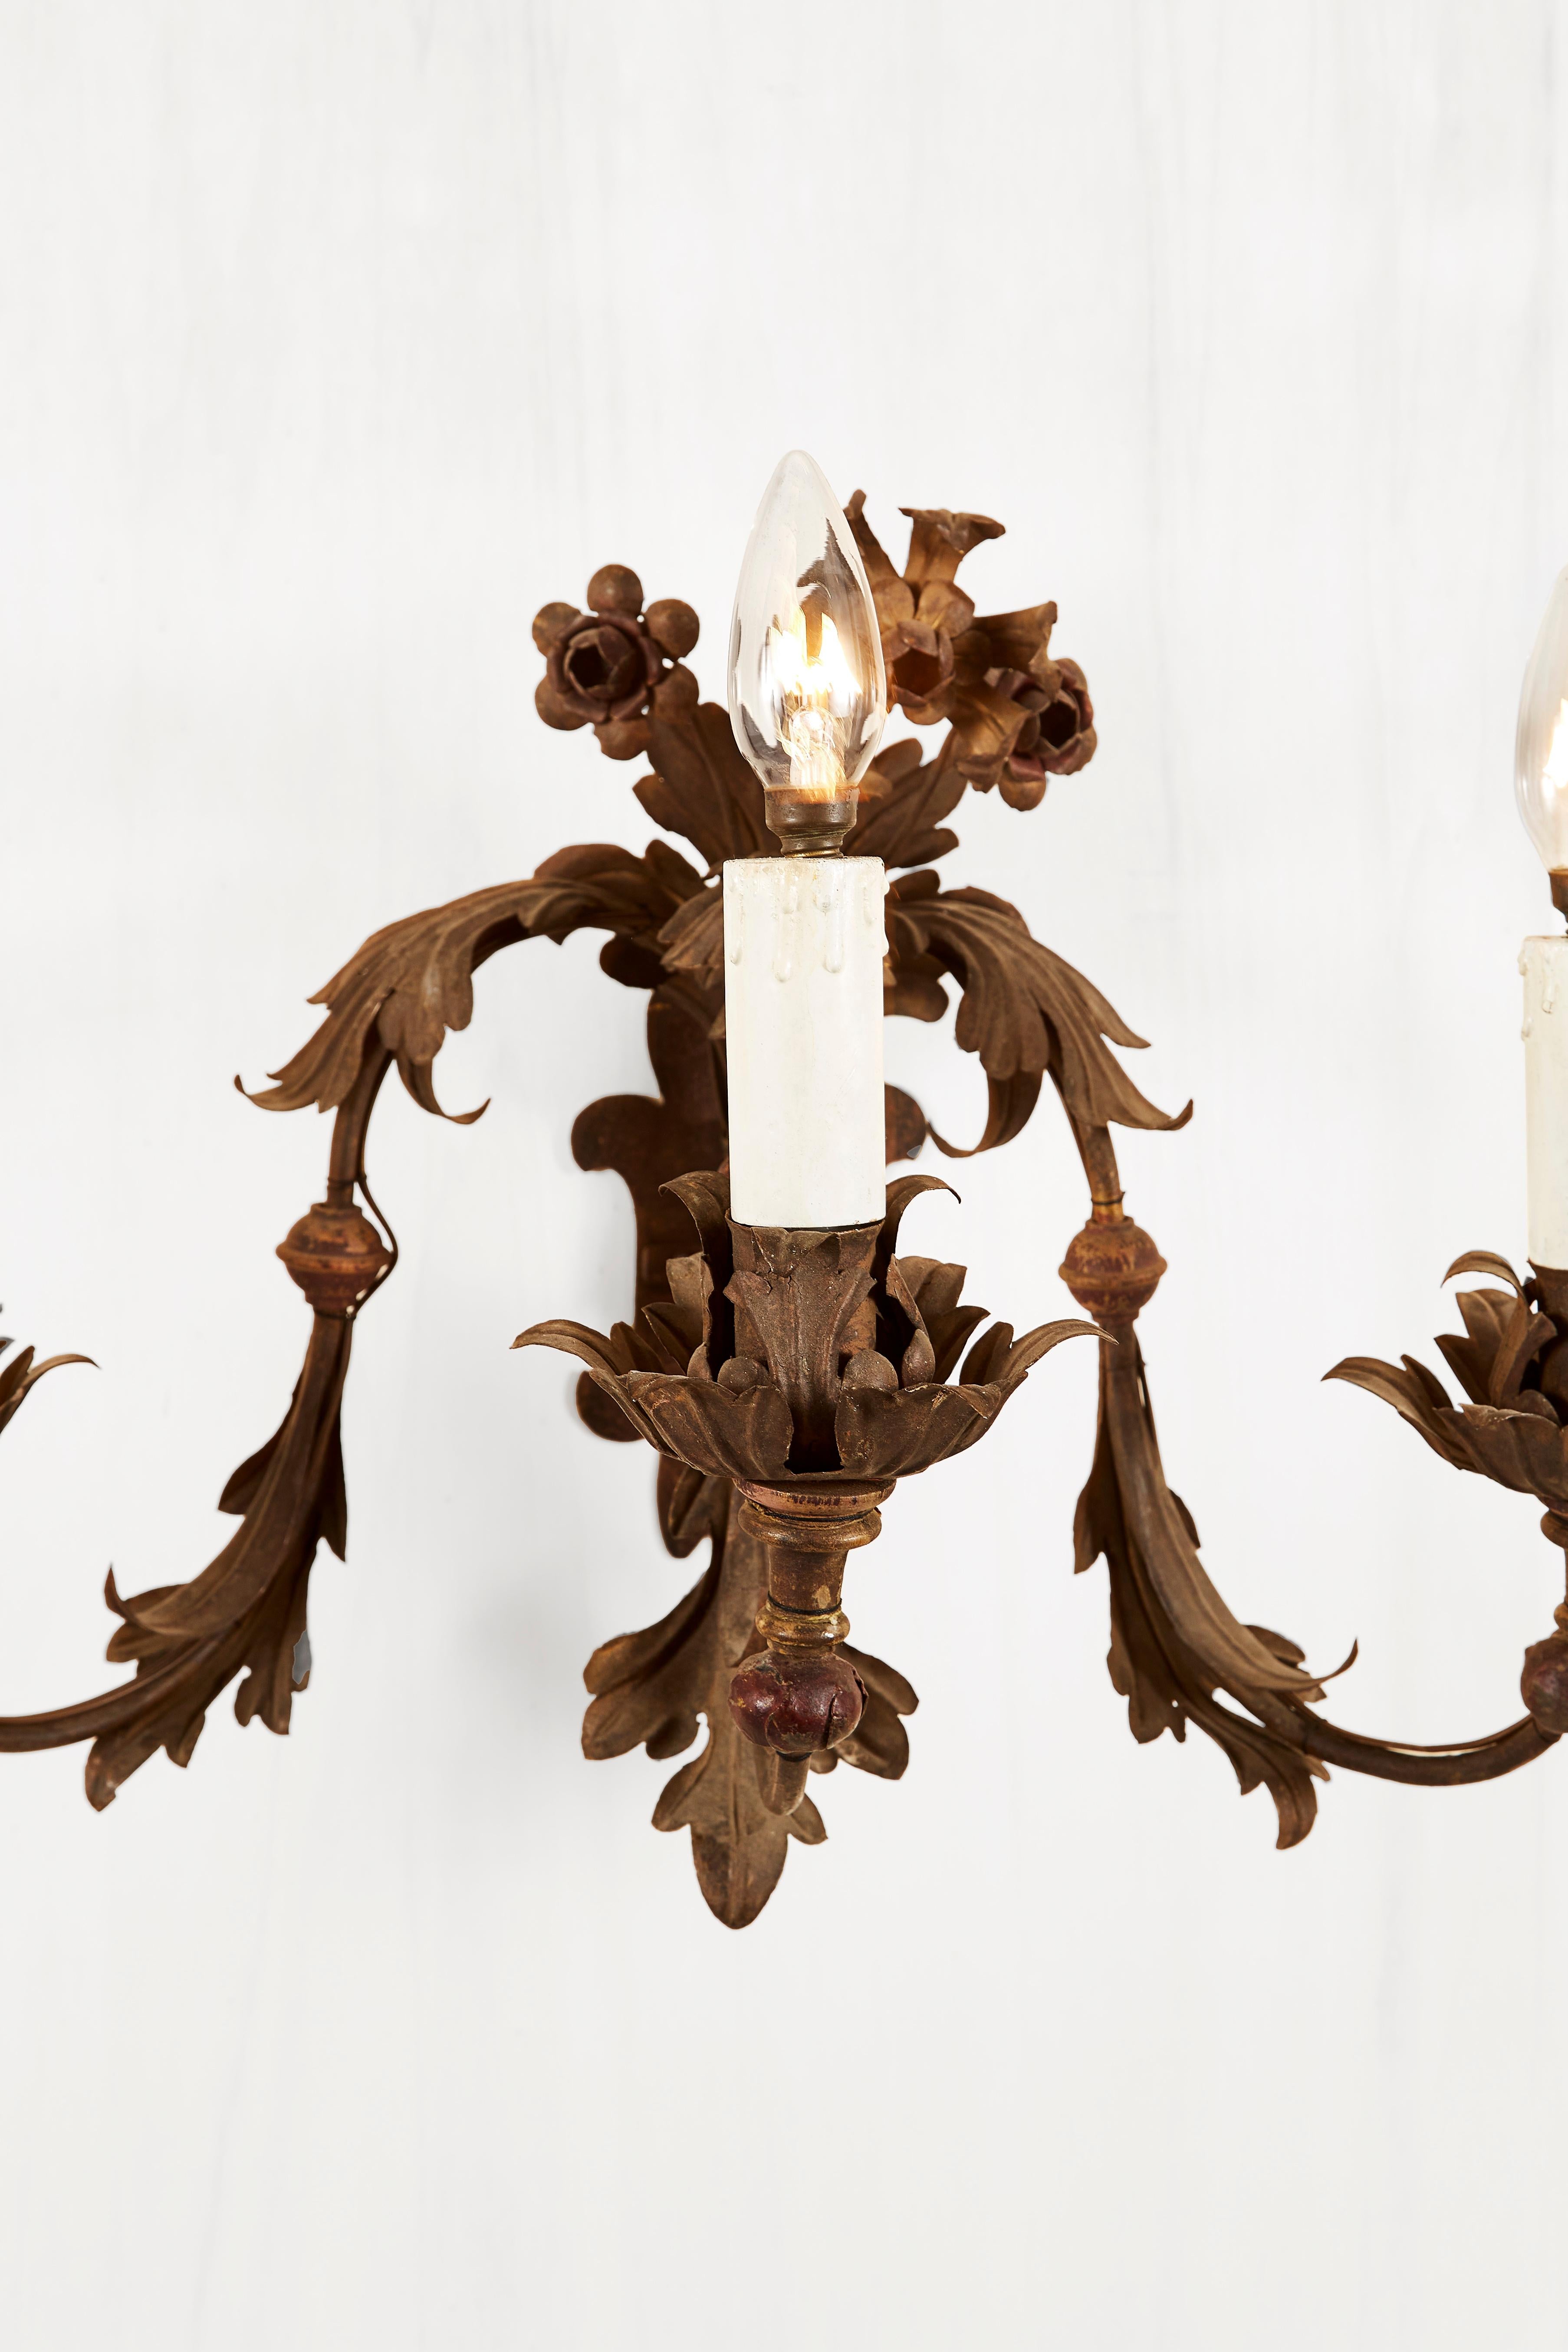 Art Nouveau Pair of 19th-Century Italian Floral Sconces Hand-Forged Wrought Iron Wall Lights